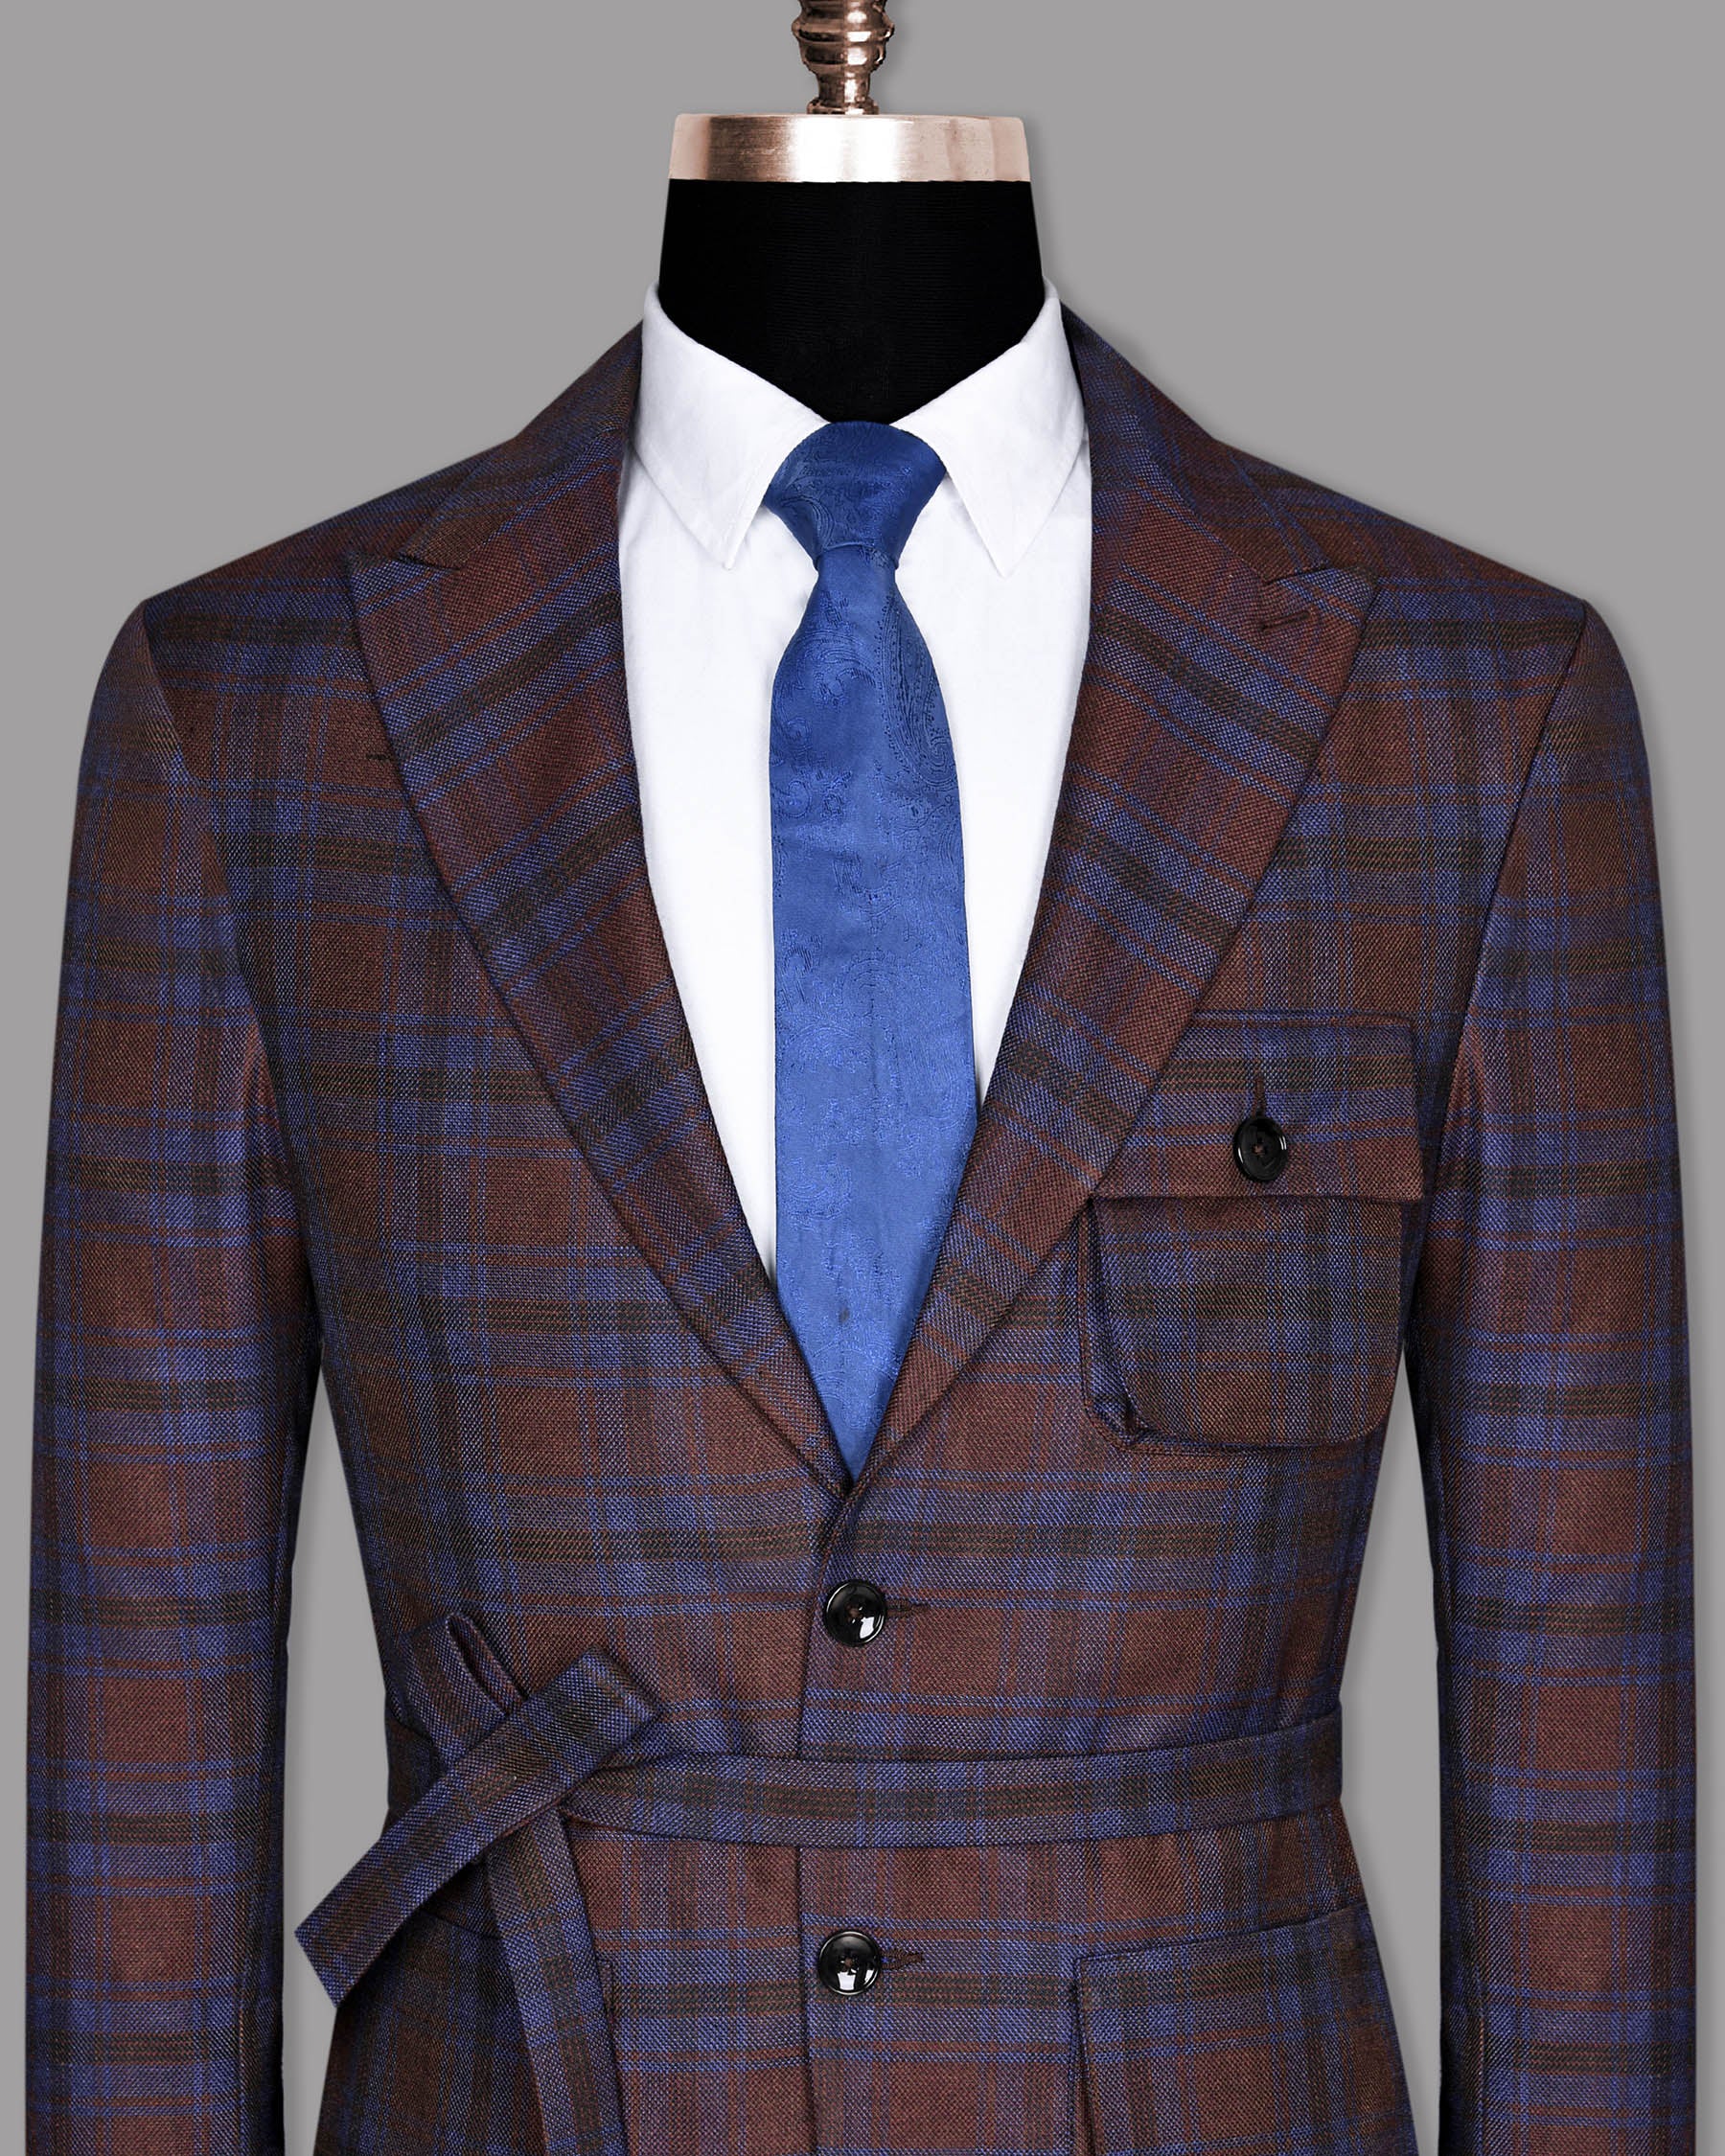 Maroon with Royal Blue Plaid Striped Wool Tweed Blazer BL685-D9-36, BL685-D9-48, BL685-D9-50, BL685-D9-38, BL685-D9-44, BL685-D9-52, BL685-D9-42, BL685-D9-46, BL685-D9-54, BL685-D9-58, BL685-D9-60, BL685-D9-40, BL685-D9-56